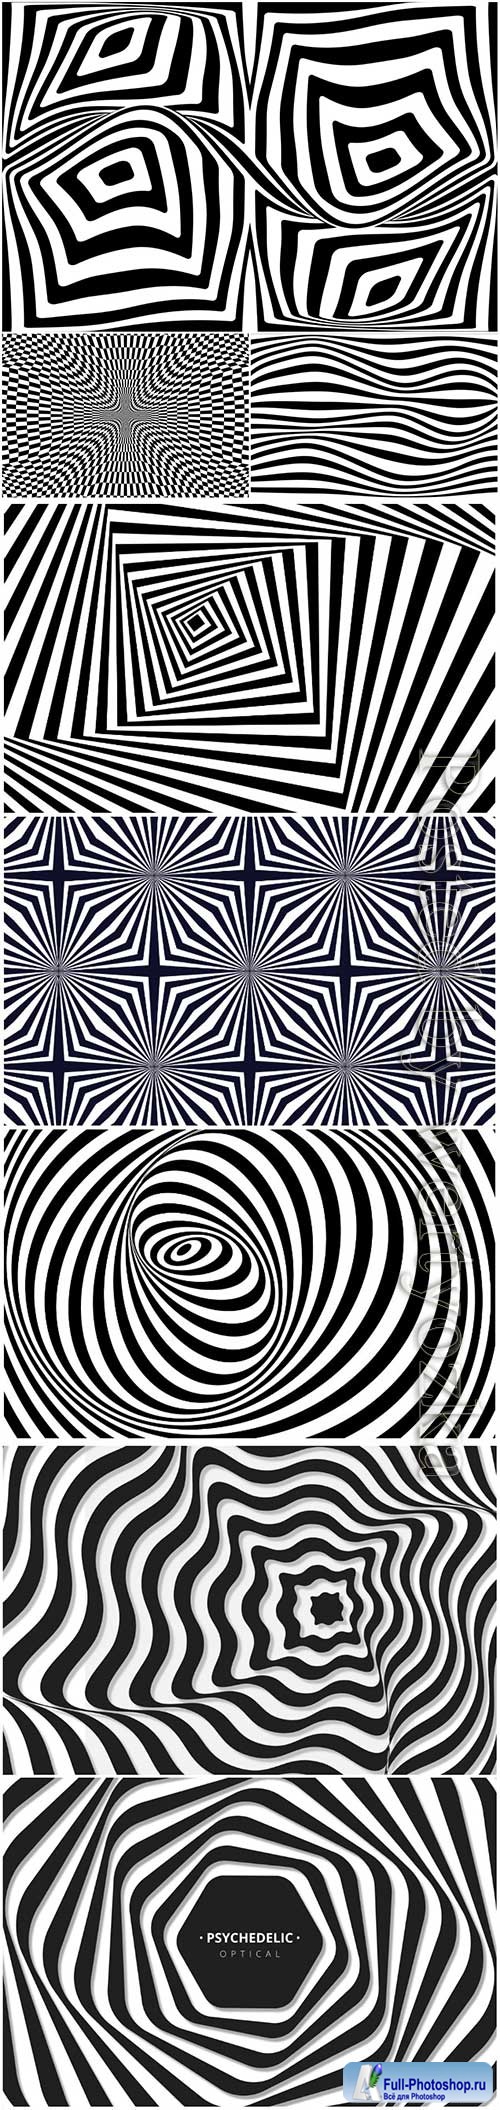 Psychedelic optical illusion vector backgroun